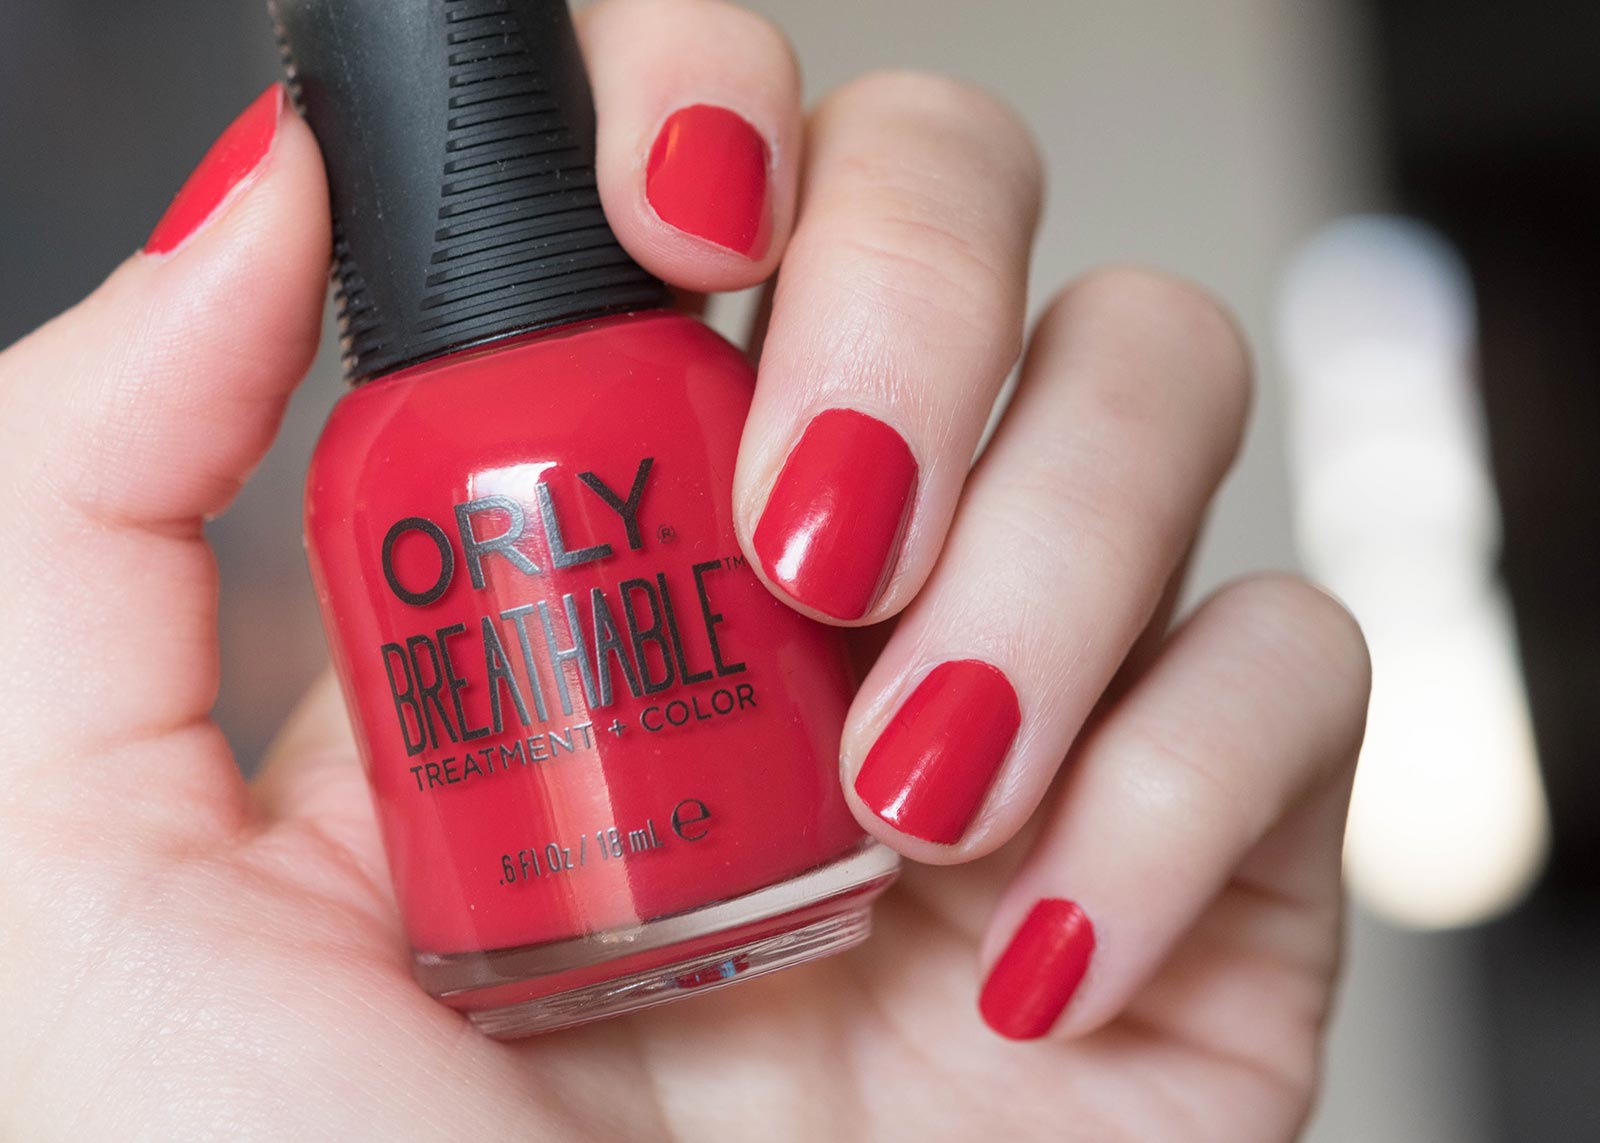 10. Orly Breathable Treatment + Color Nail Polish in "Rose Water" - wide 5